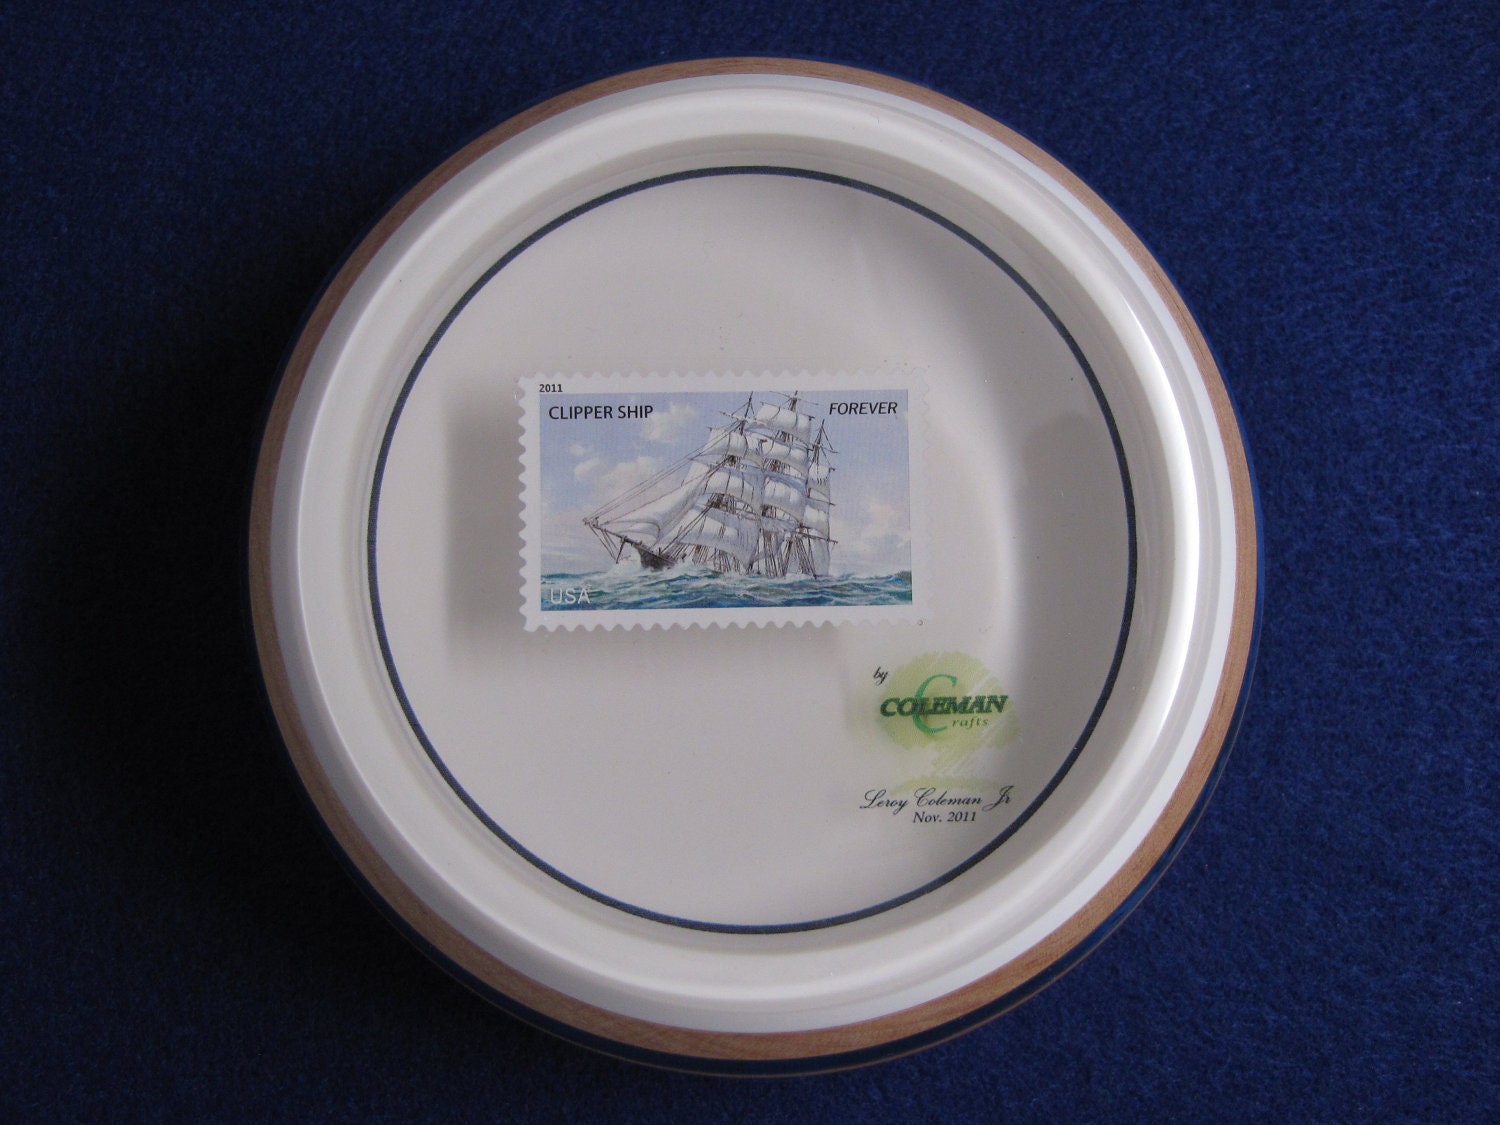 HARDMAPLE Bowl With CLIPPER SHIP (2011) Stamp Embeded